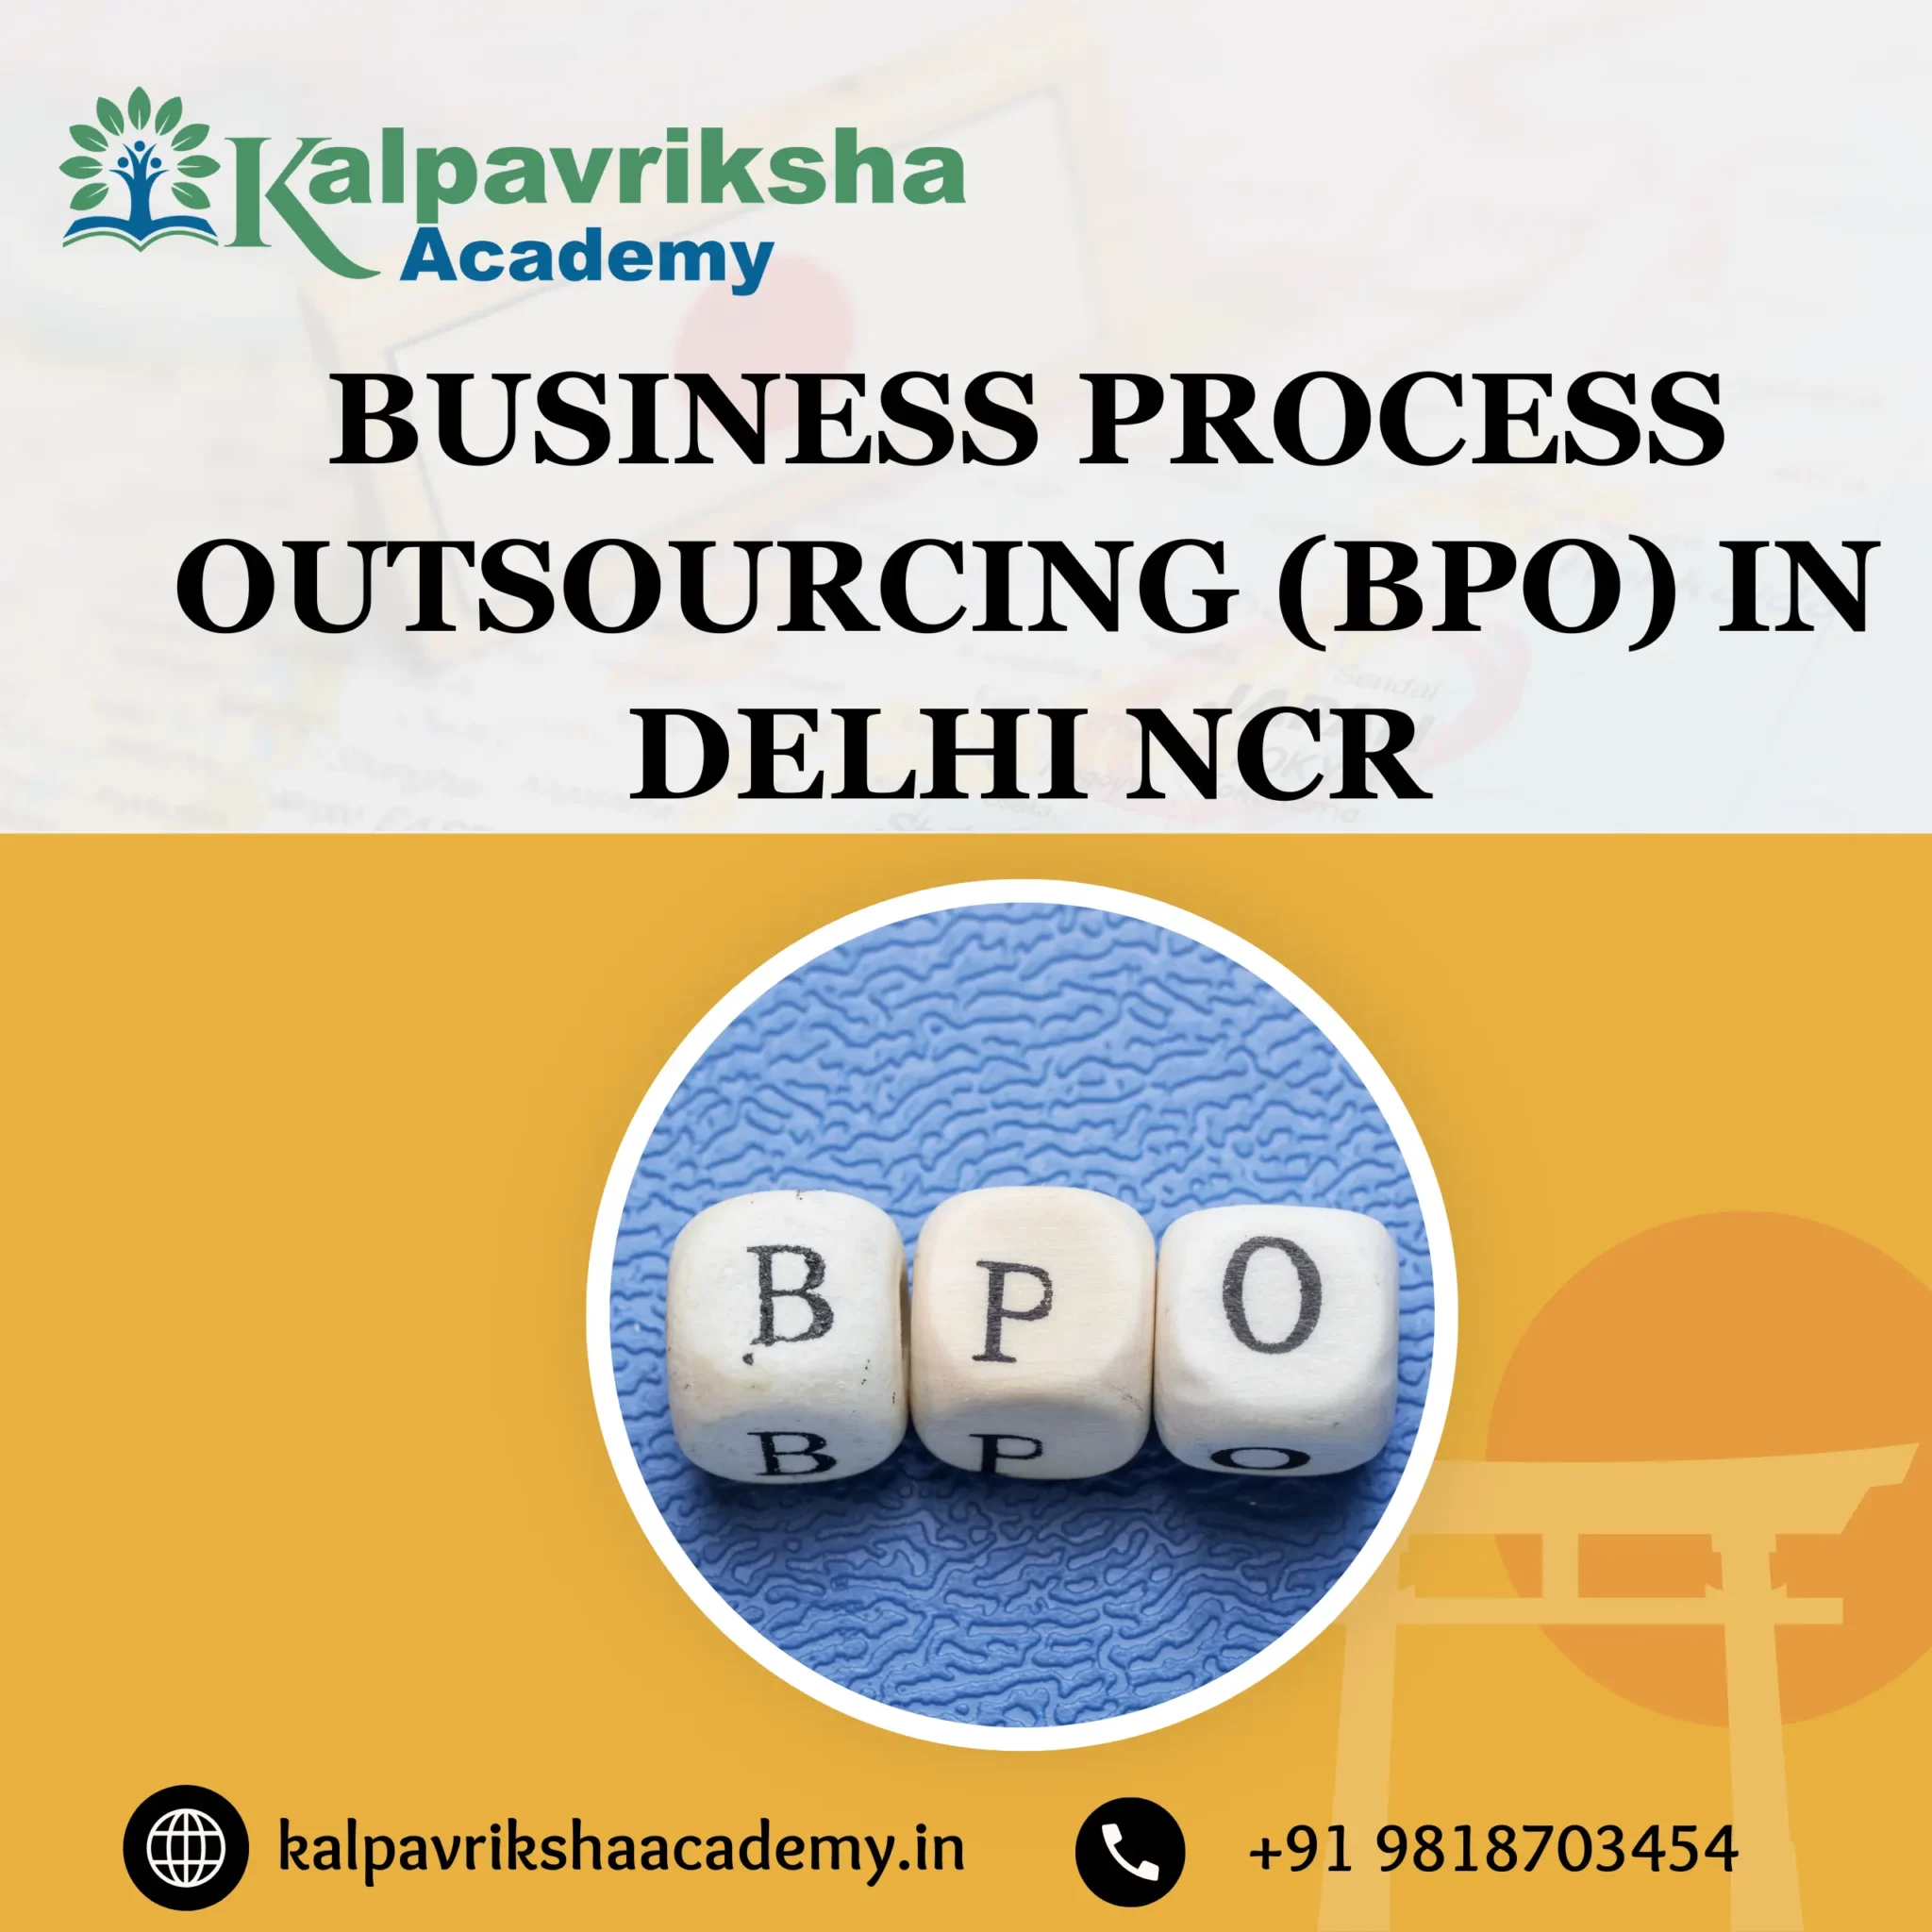 Online Business Process Outsourcing (BPO) Course In Delhi NCR